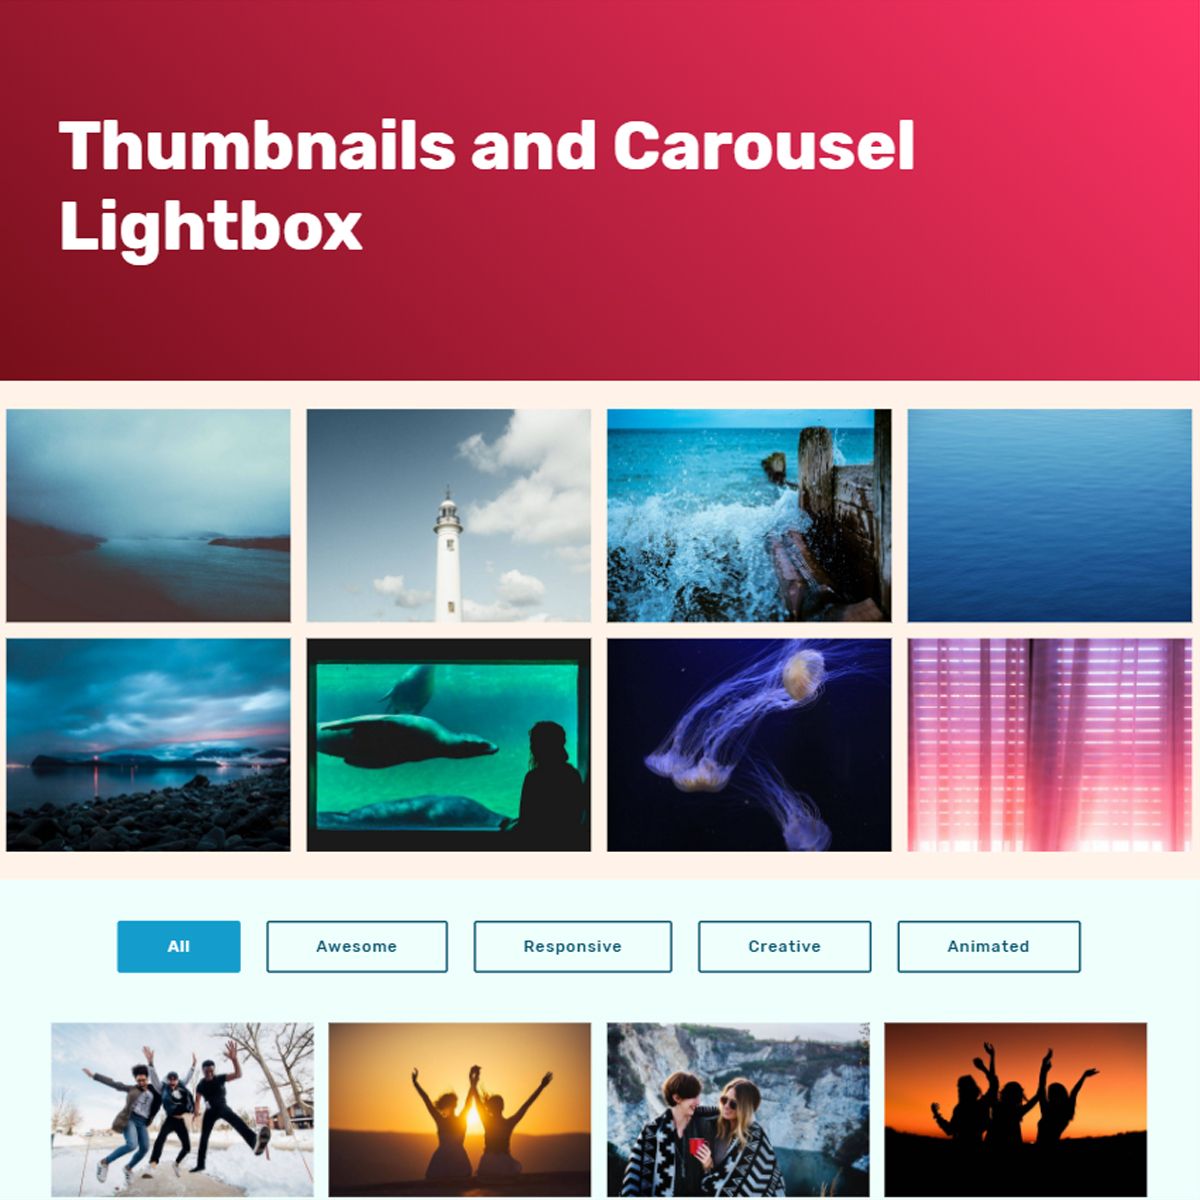 HTML5 Bootstrap Image Carousel